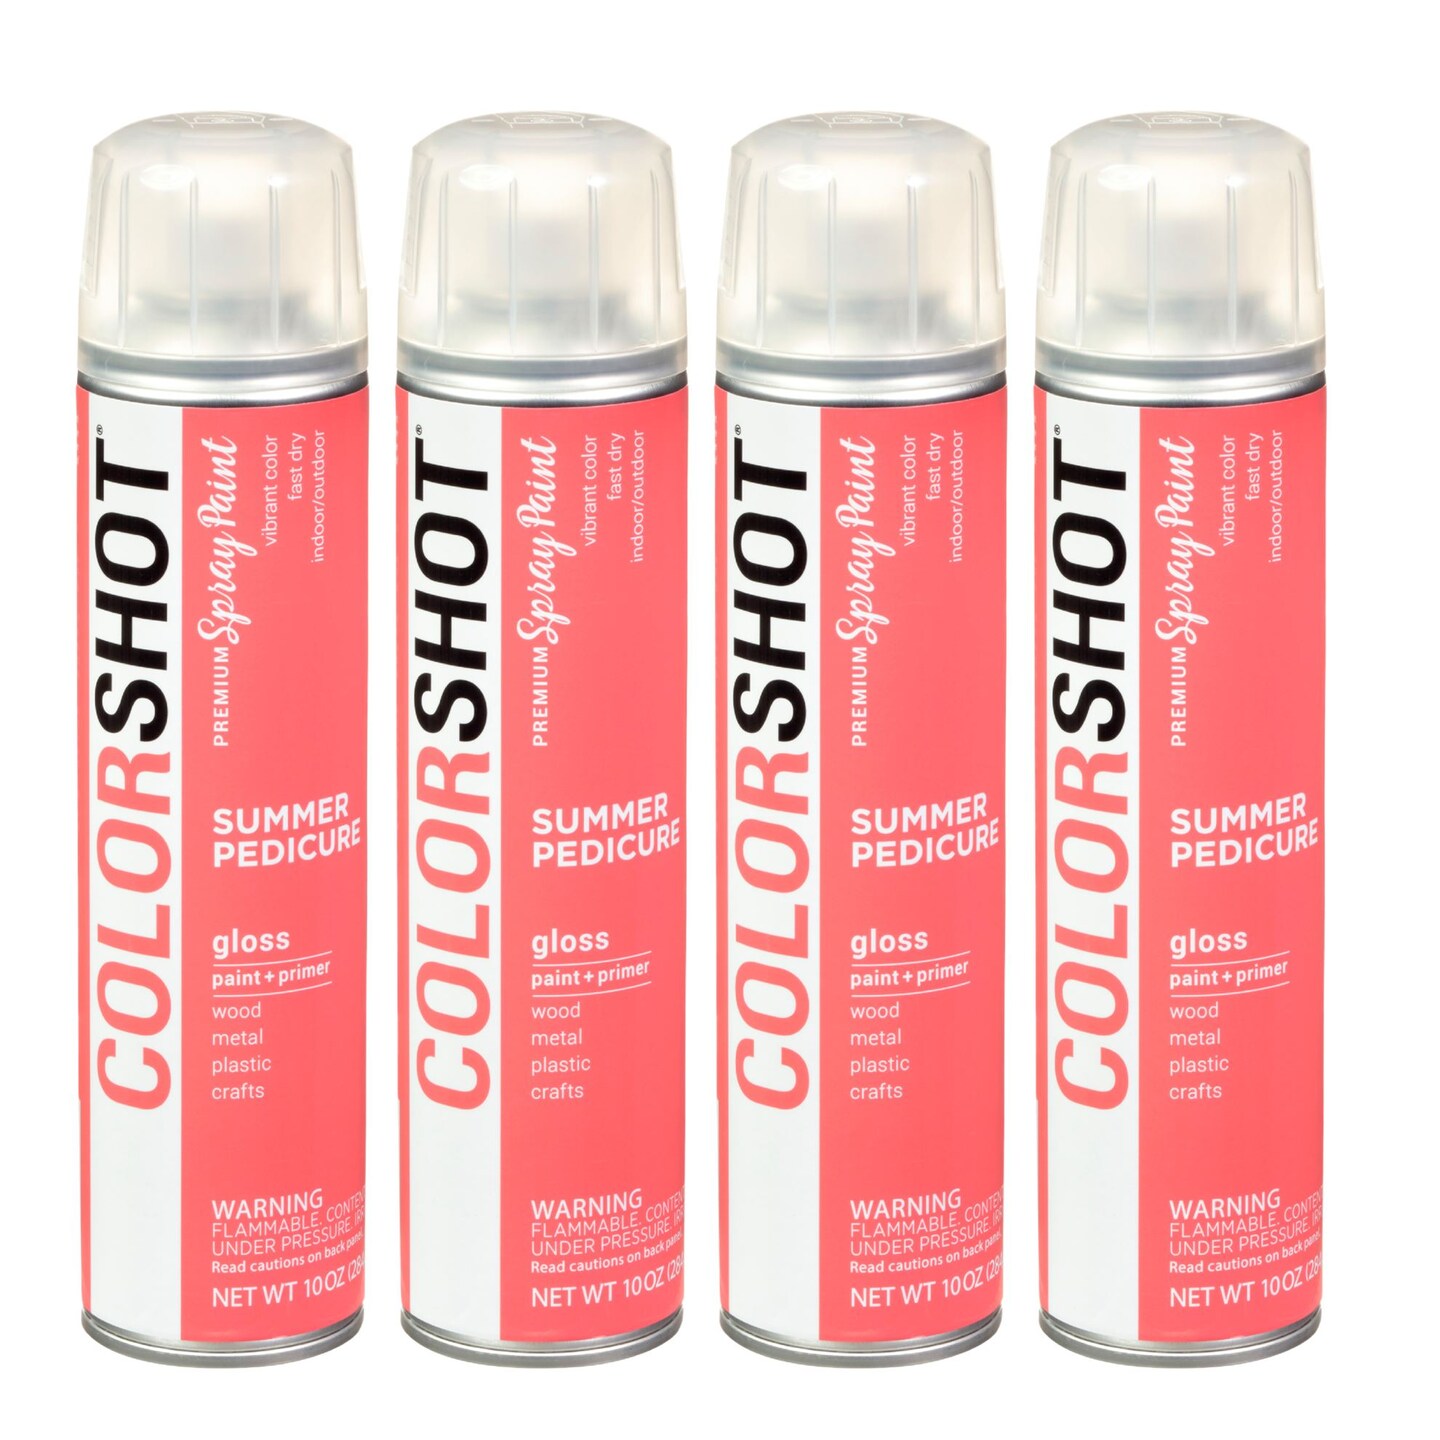 COLORSHOT Gloss Spray Paint Summer Pedicure (Coral) 10 oz. 4 Pack